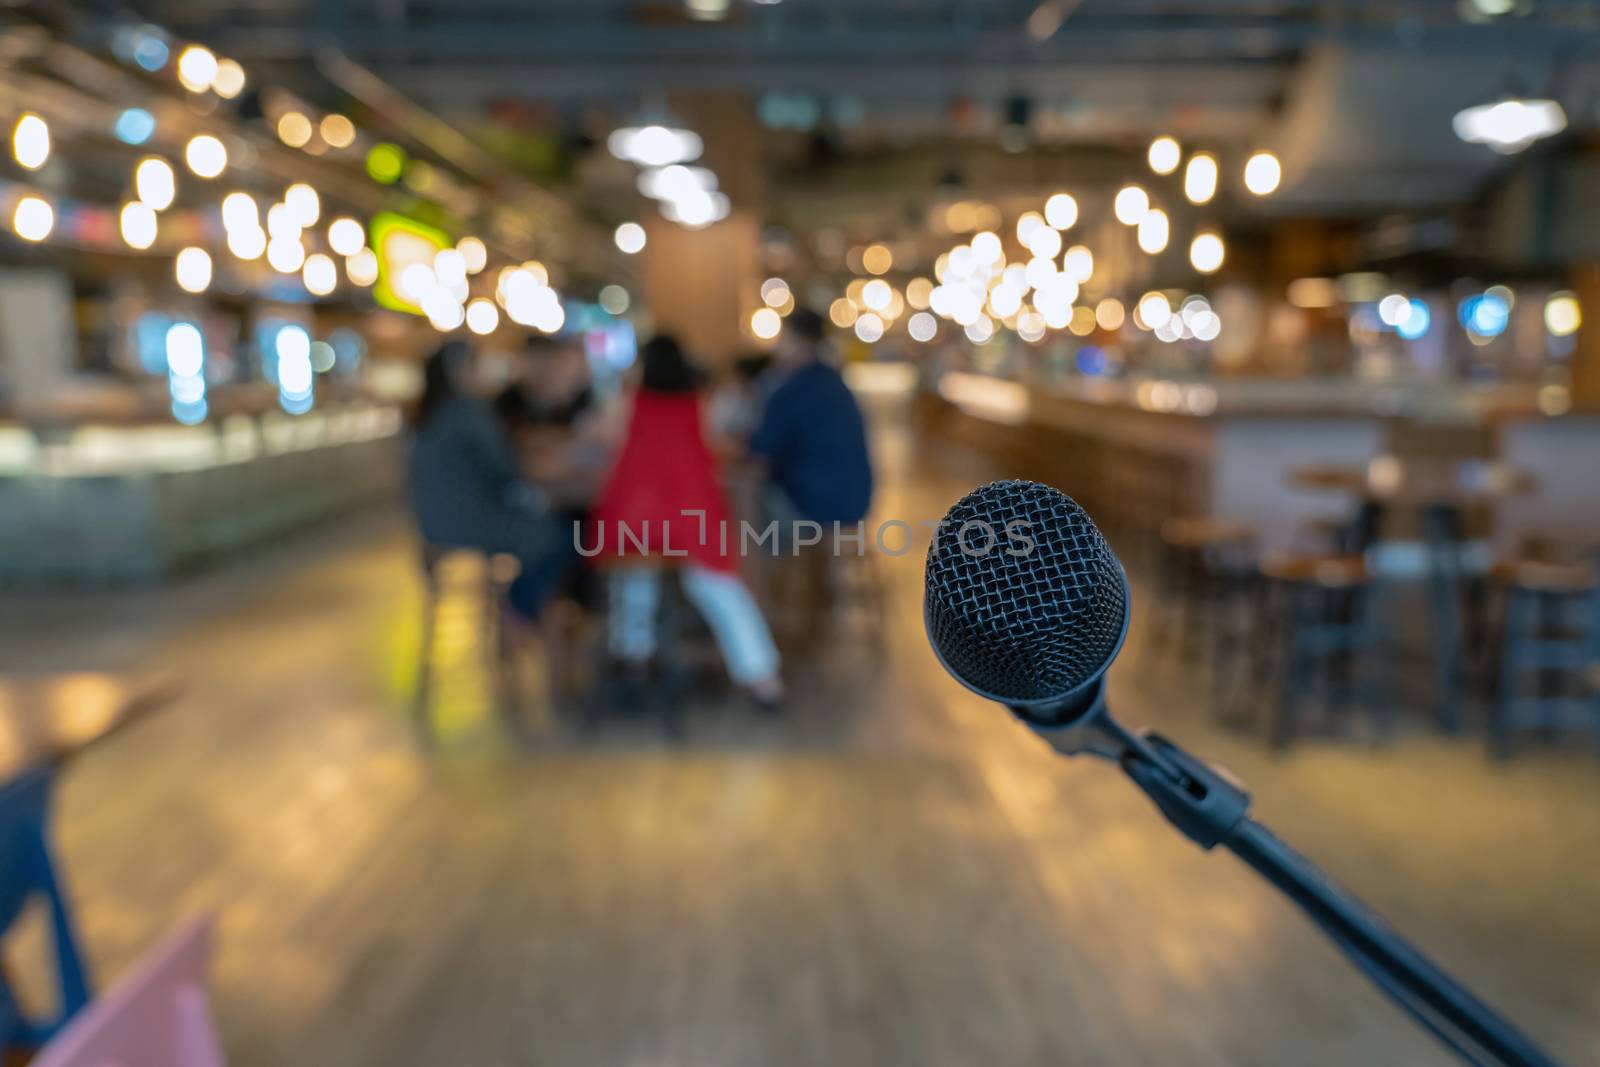 Microphone over the Abstract blurred photo of people group having the meeting in public working space or seminar room, misucal and education with modern lifestyle concept